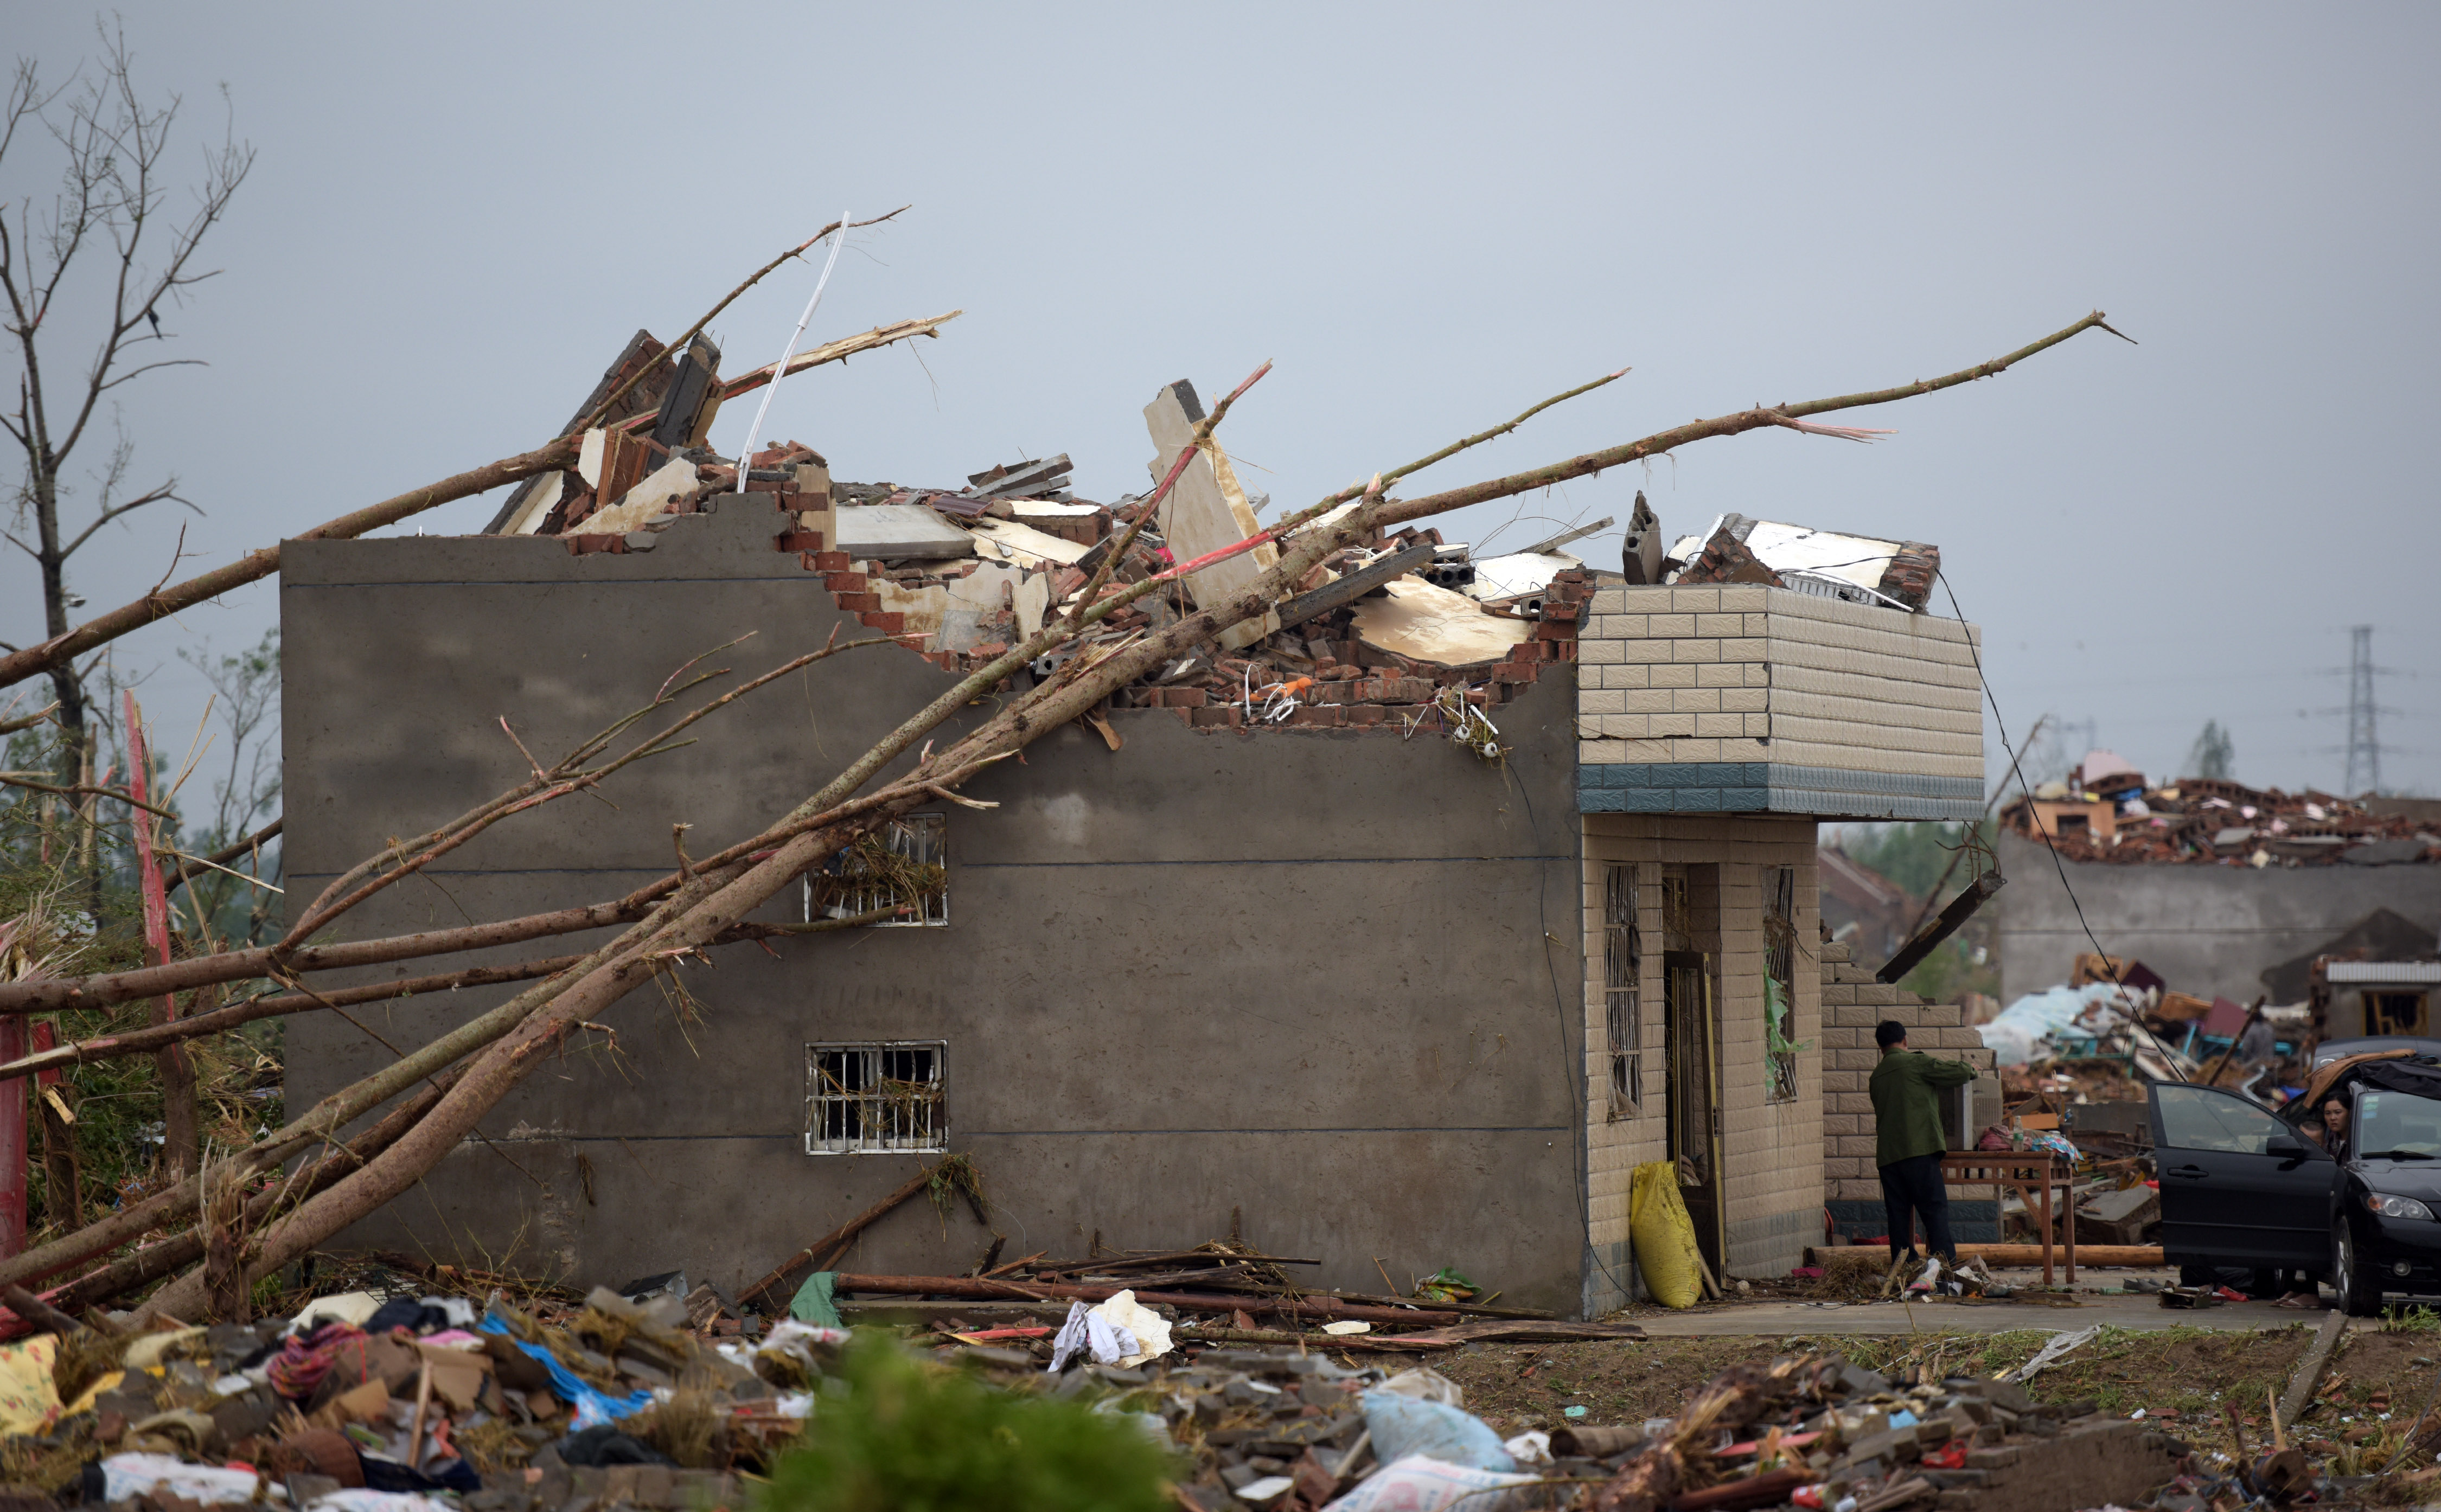 Residents walk in the rubble of destroyed houses after a tornado in Funing, in Yancheng, in China's Jiangsu province on June 24, 2016. Extreme weather, including hailstorms, heavy rain and a tornado, killed 78 and injured dozens in China's eastern Jiangsu province, the official Xinhua news agency reported on June 23.  / AFP PHOTO / JOHANNES EISELE